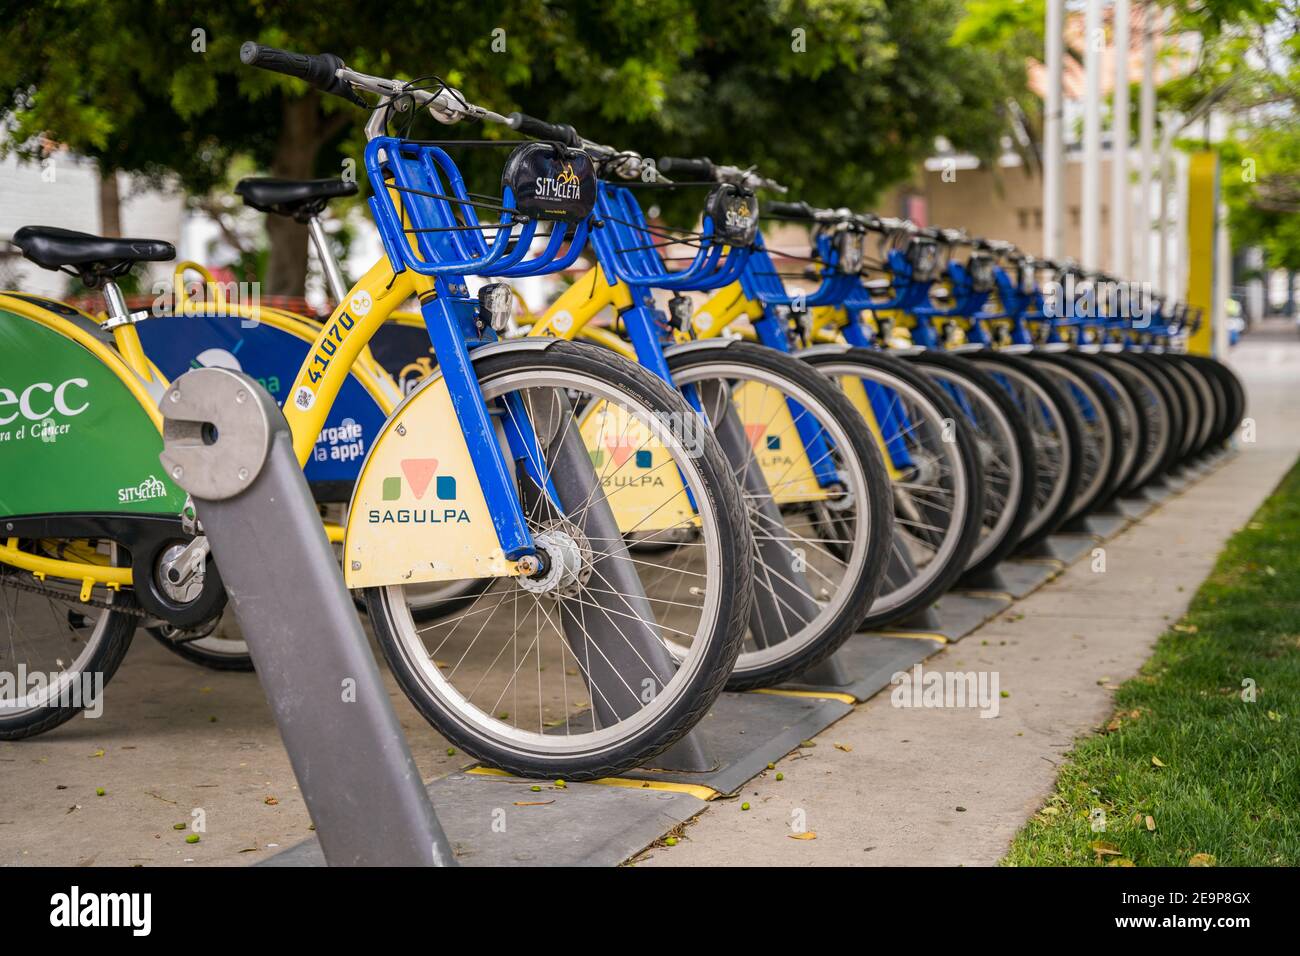 Las Palmas, Spain - August 8, 2020. Group of many public city bicycles parked in rack row. Smart eco friendly transport Stock Photo